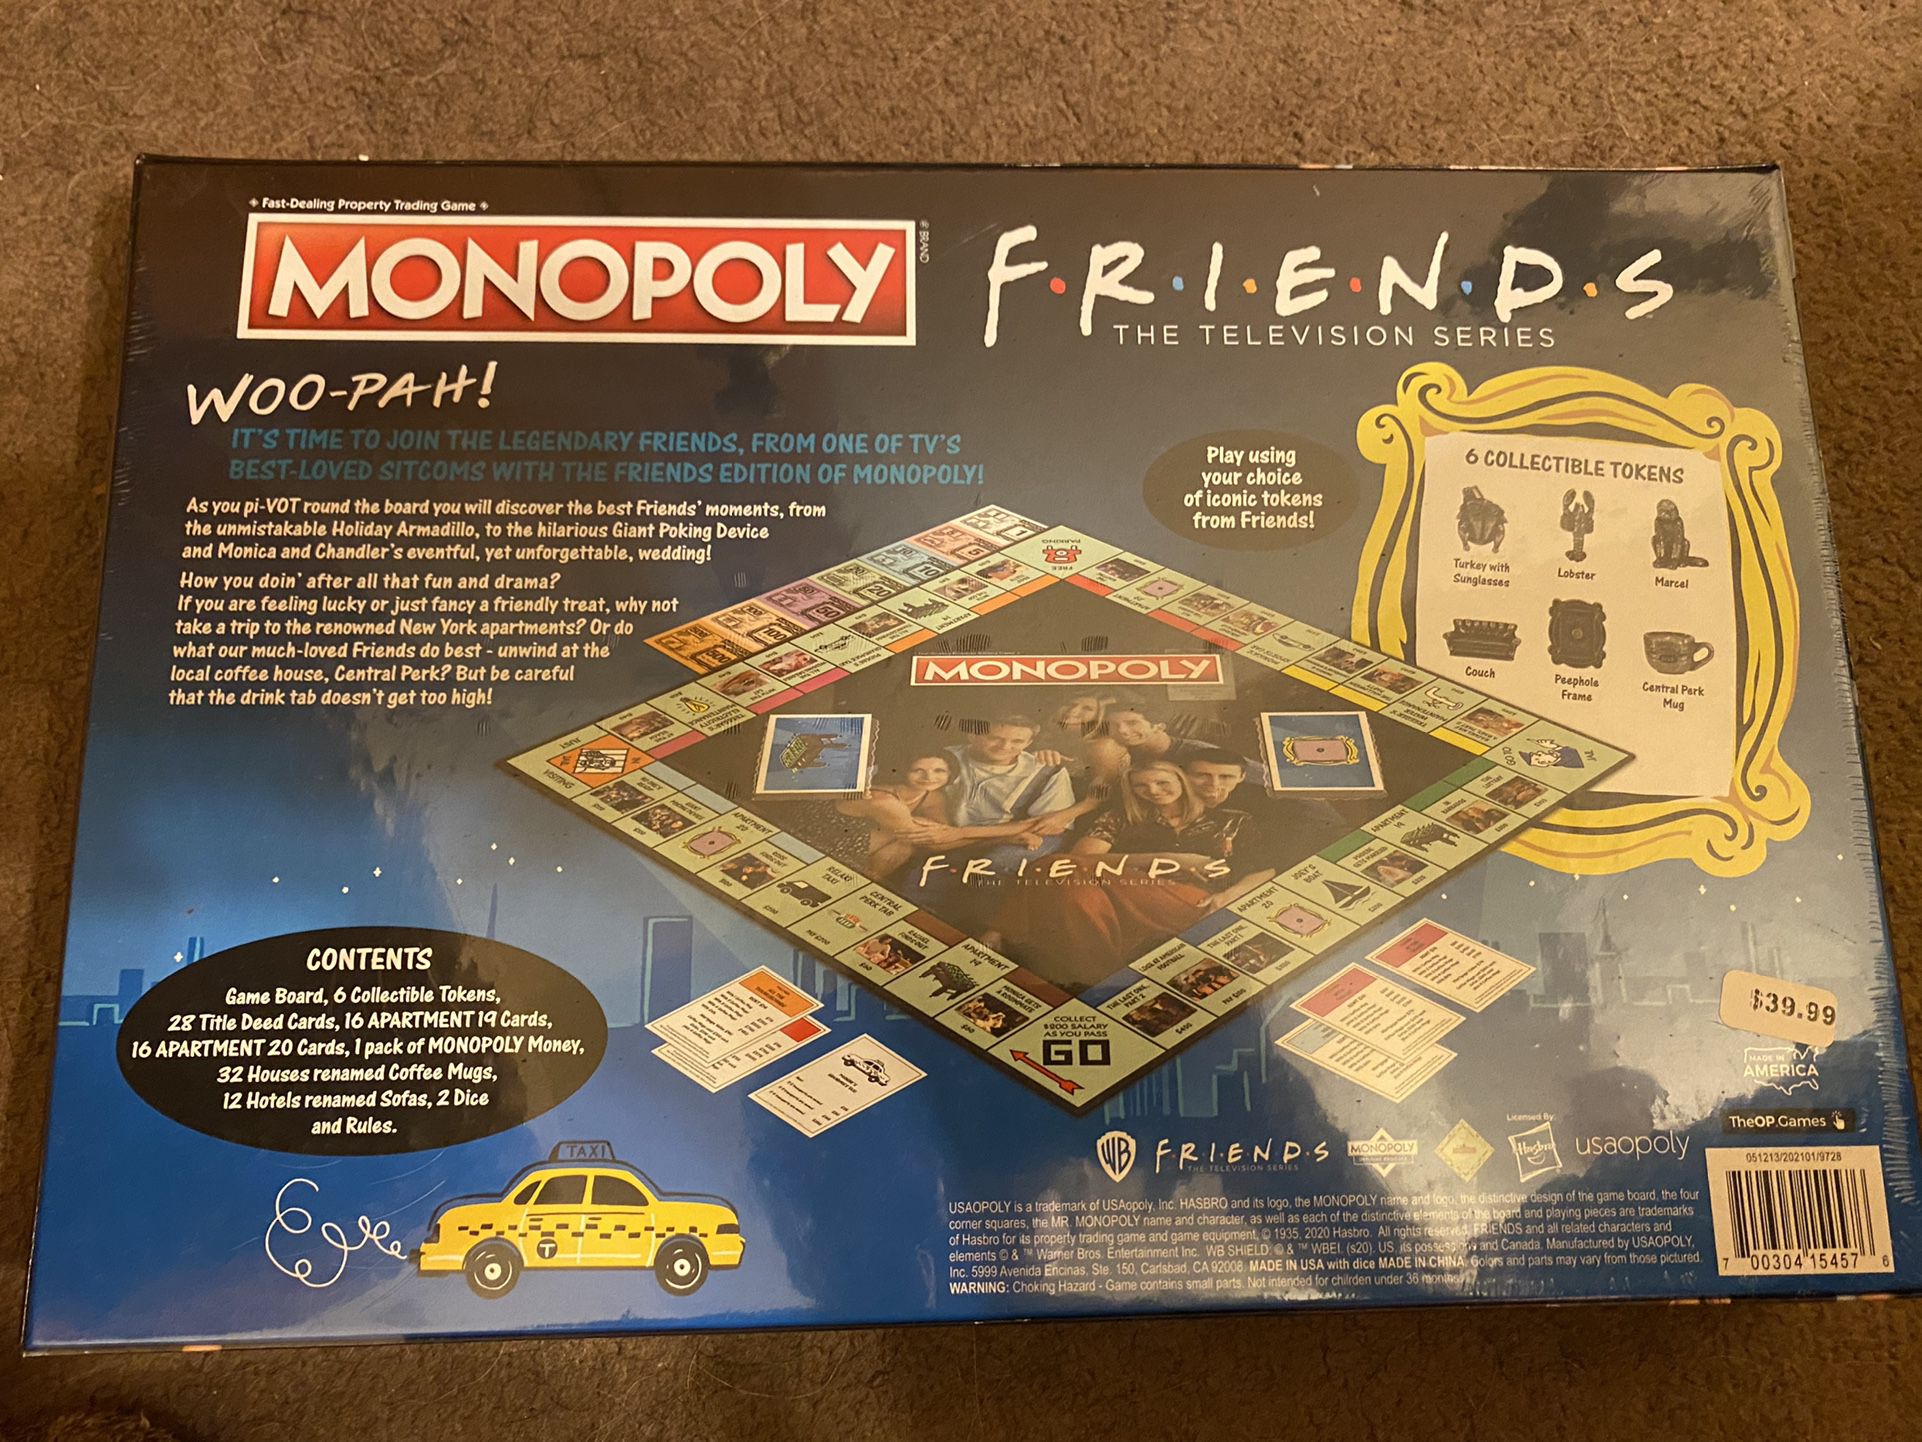 Friends-themed Monopoly